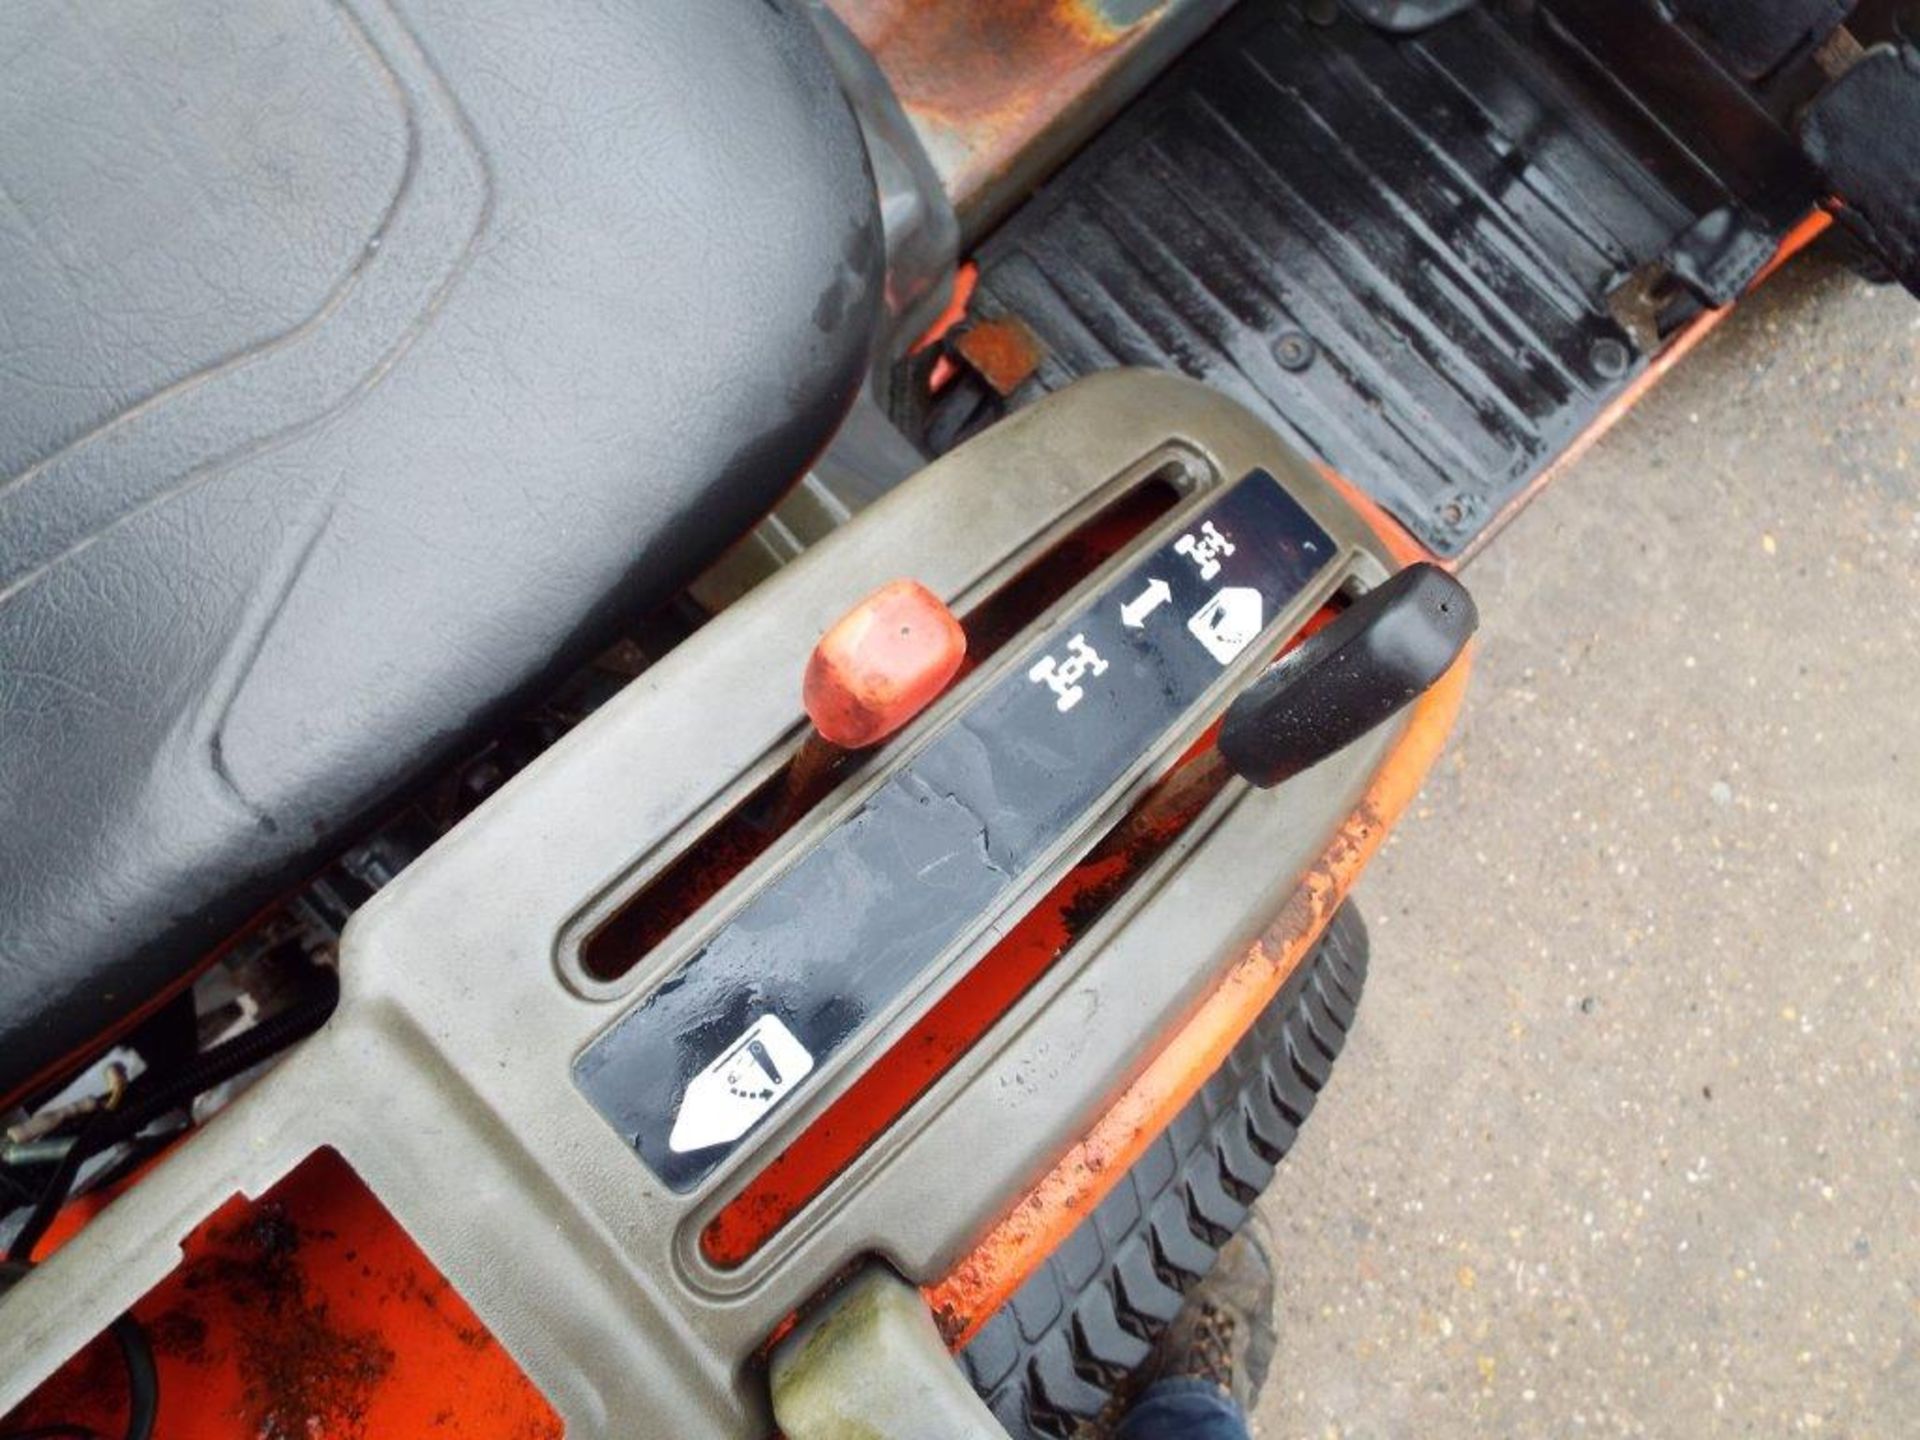 Kubota B1410D 4WD Diesel Powered Compact Tractor with Hydraulic Snow Plough Attachment - Image 16 of 25